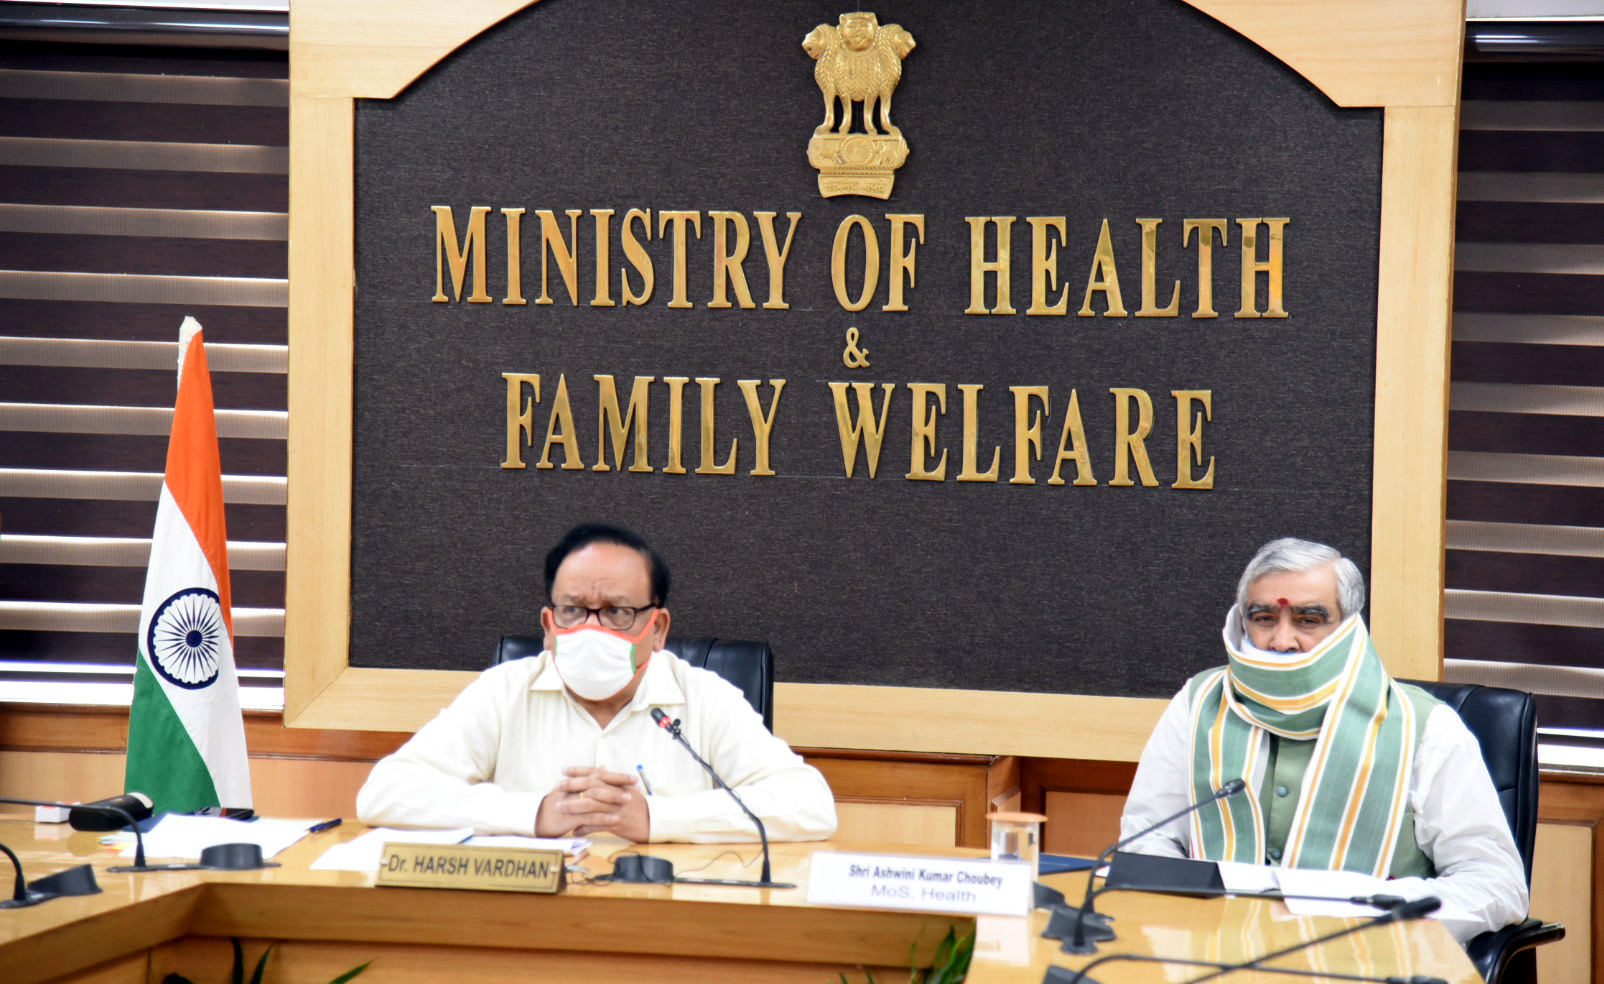 The Union Minister for Health & Family Welfare, Science & Technology and Earth Sciences, Dr. Harsh Vardhan chairing a high-level review meeting with the Lt. Governor of Delhi, Shri Anil Baijal, the Health Minister of Delhi, Shri Satyendra Jain, various District Magistrates, Commissioners & Mayors of Delhi on status, preparations & management of COVID-19 in various districts of NCT of Delhi, via video conferencing, in New Delhi on June 04, 2020. The Minister of State for Health and Family Welfare, Shri Ashwini Kumar Choubey is also seen.